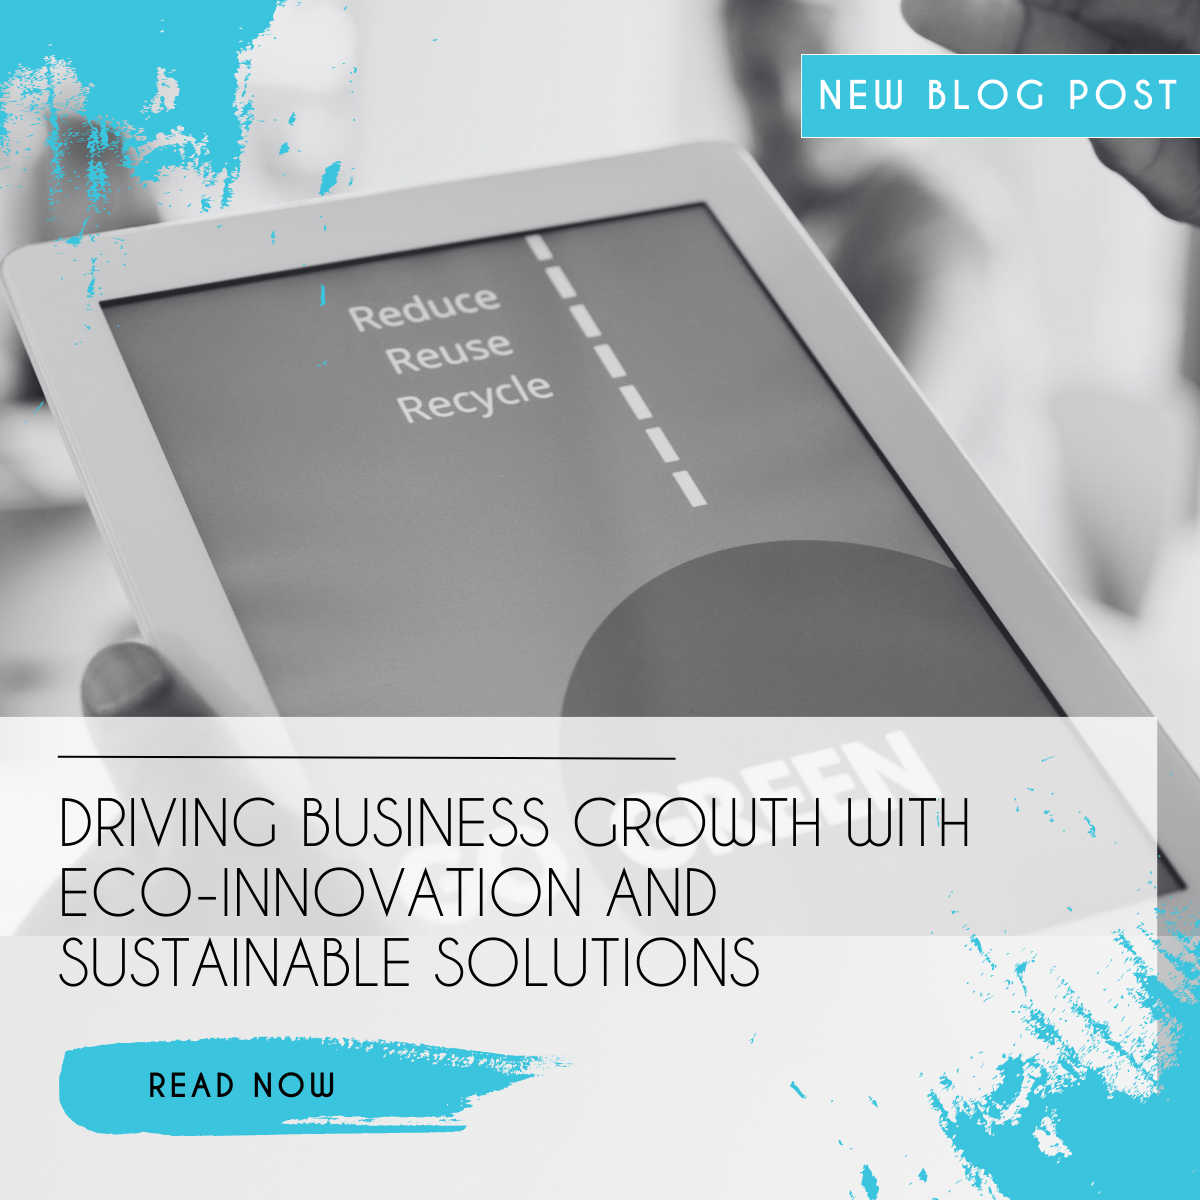 Driving Business Growth with Eco-Innovation and Sustainable Solutions